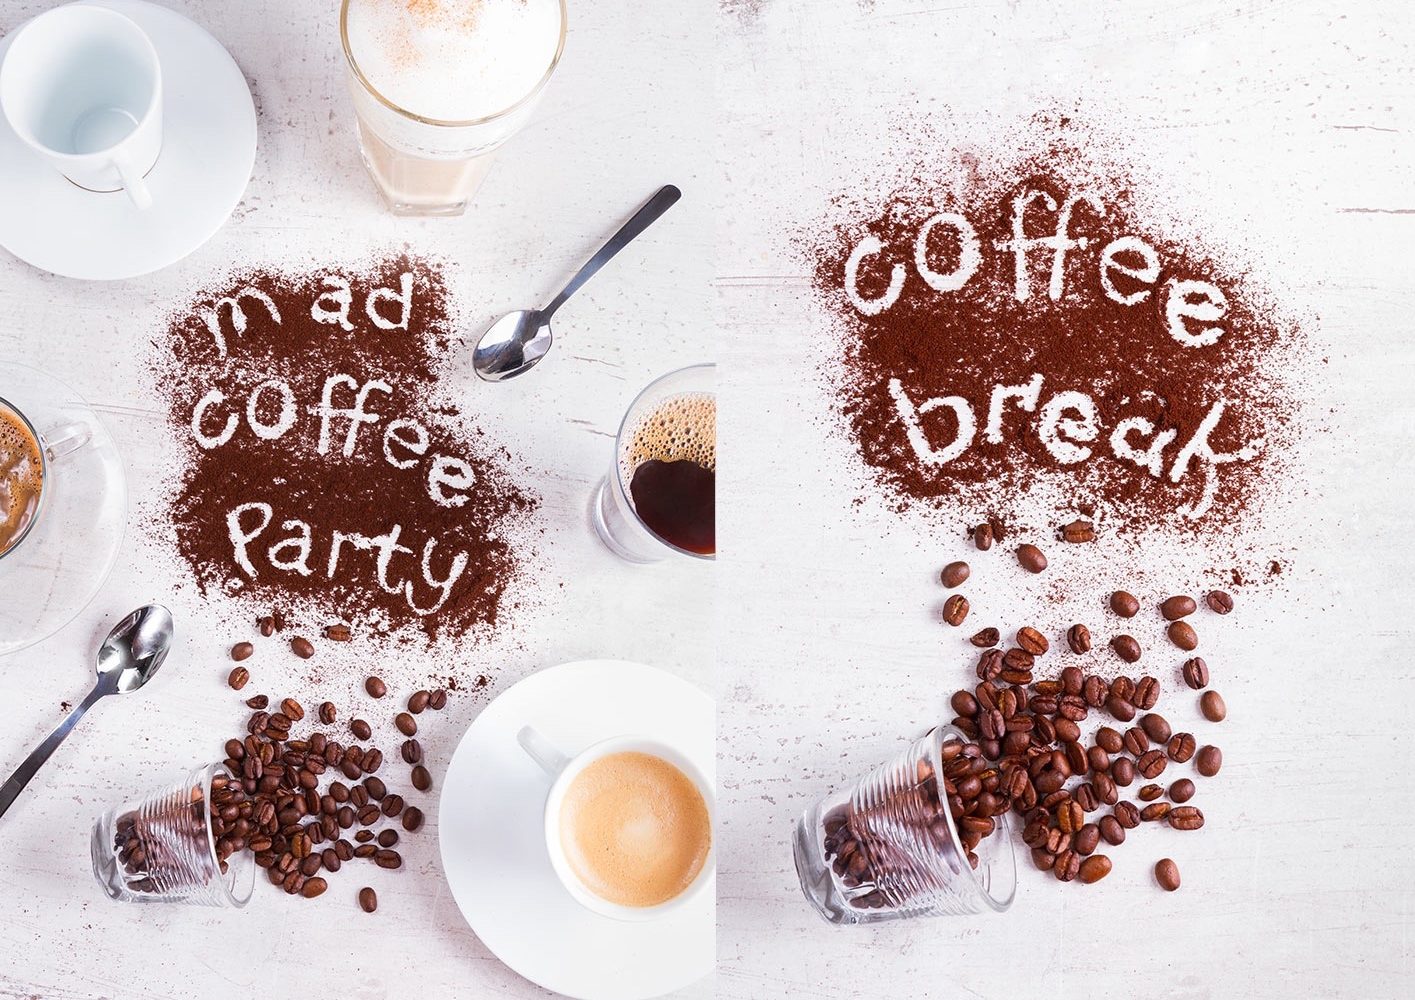 5 Creative Photos That Play With Food Typography